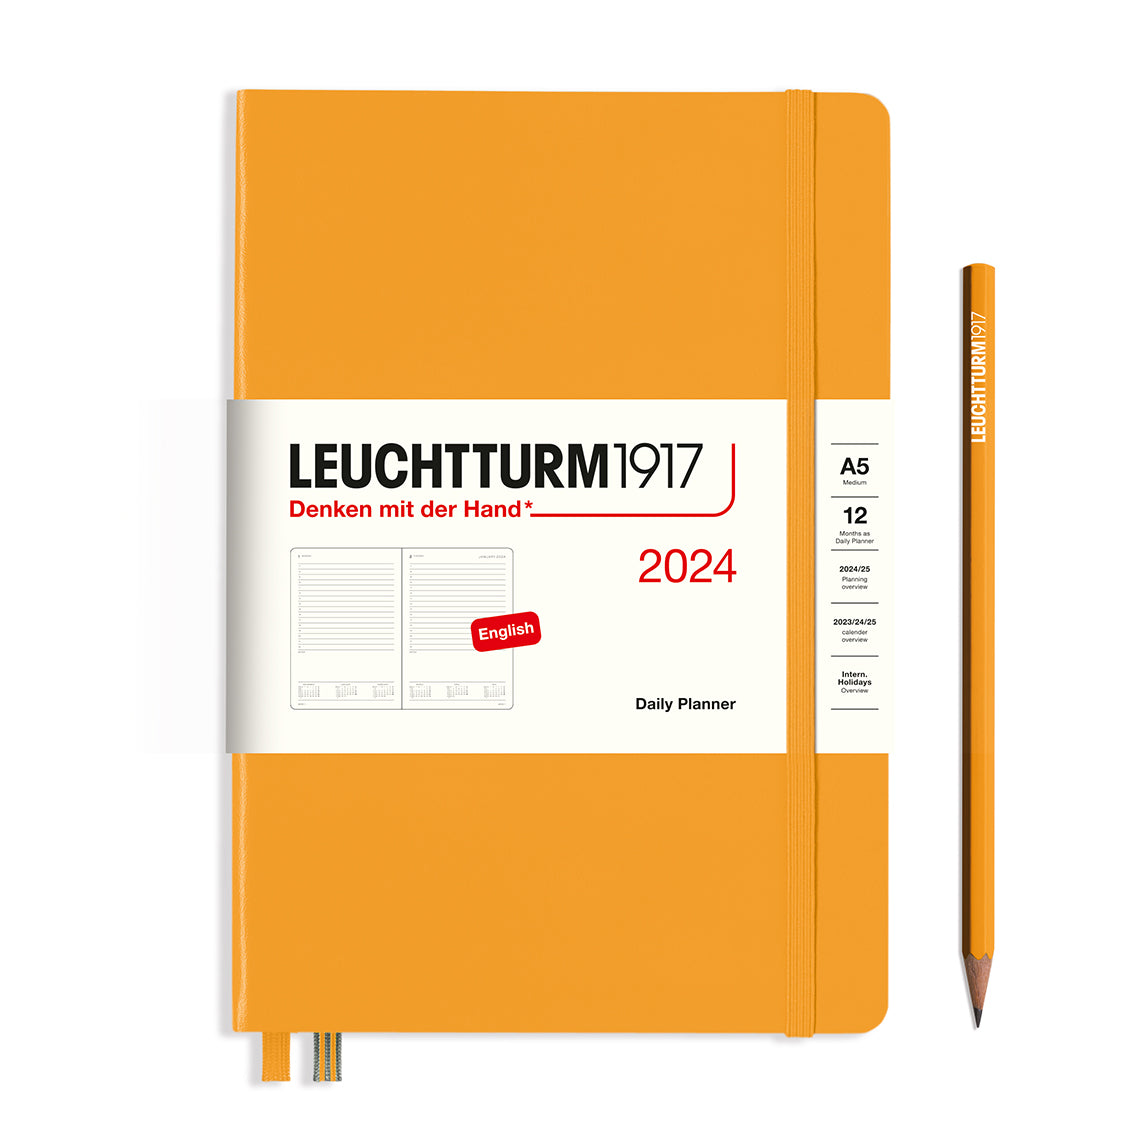 An image of an orange planner with an orange elastic band holding it together and a cream paper wrap around the middle stating the business name Leuchtturm1917, that it is for the year 2024, it is a daily planner, is A5 in size and an English language version. It has an image on the wrap showing the inside layout which is 1 day per page. An orange pencil is shown at the side of the planner.